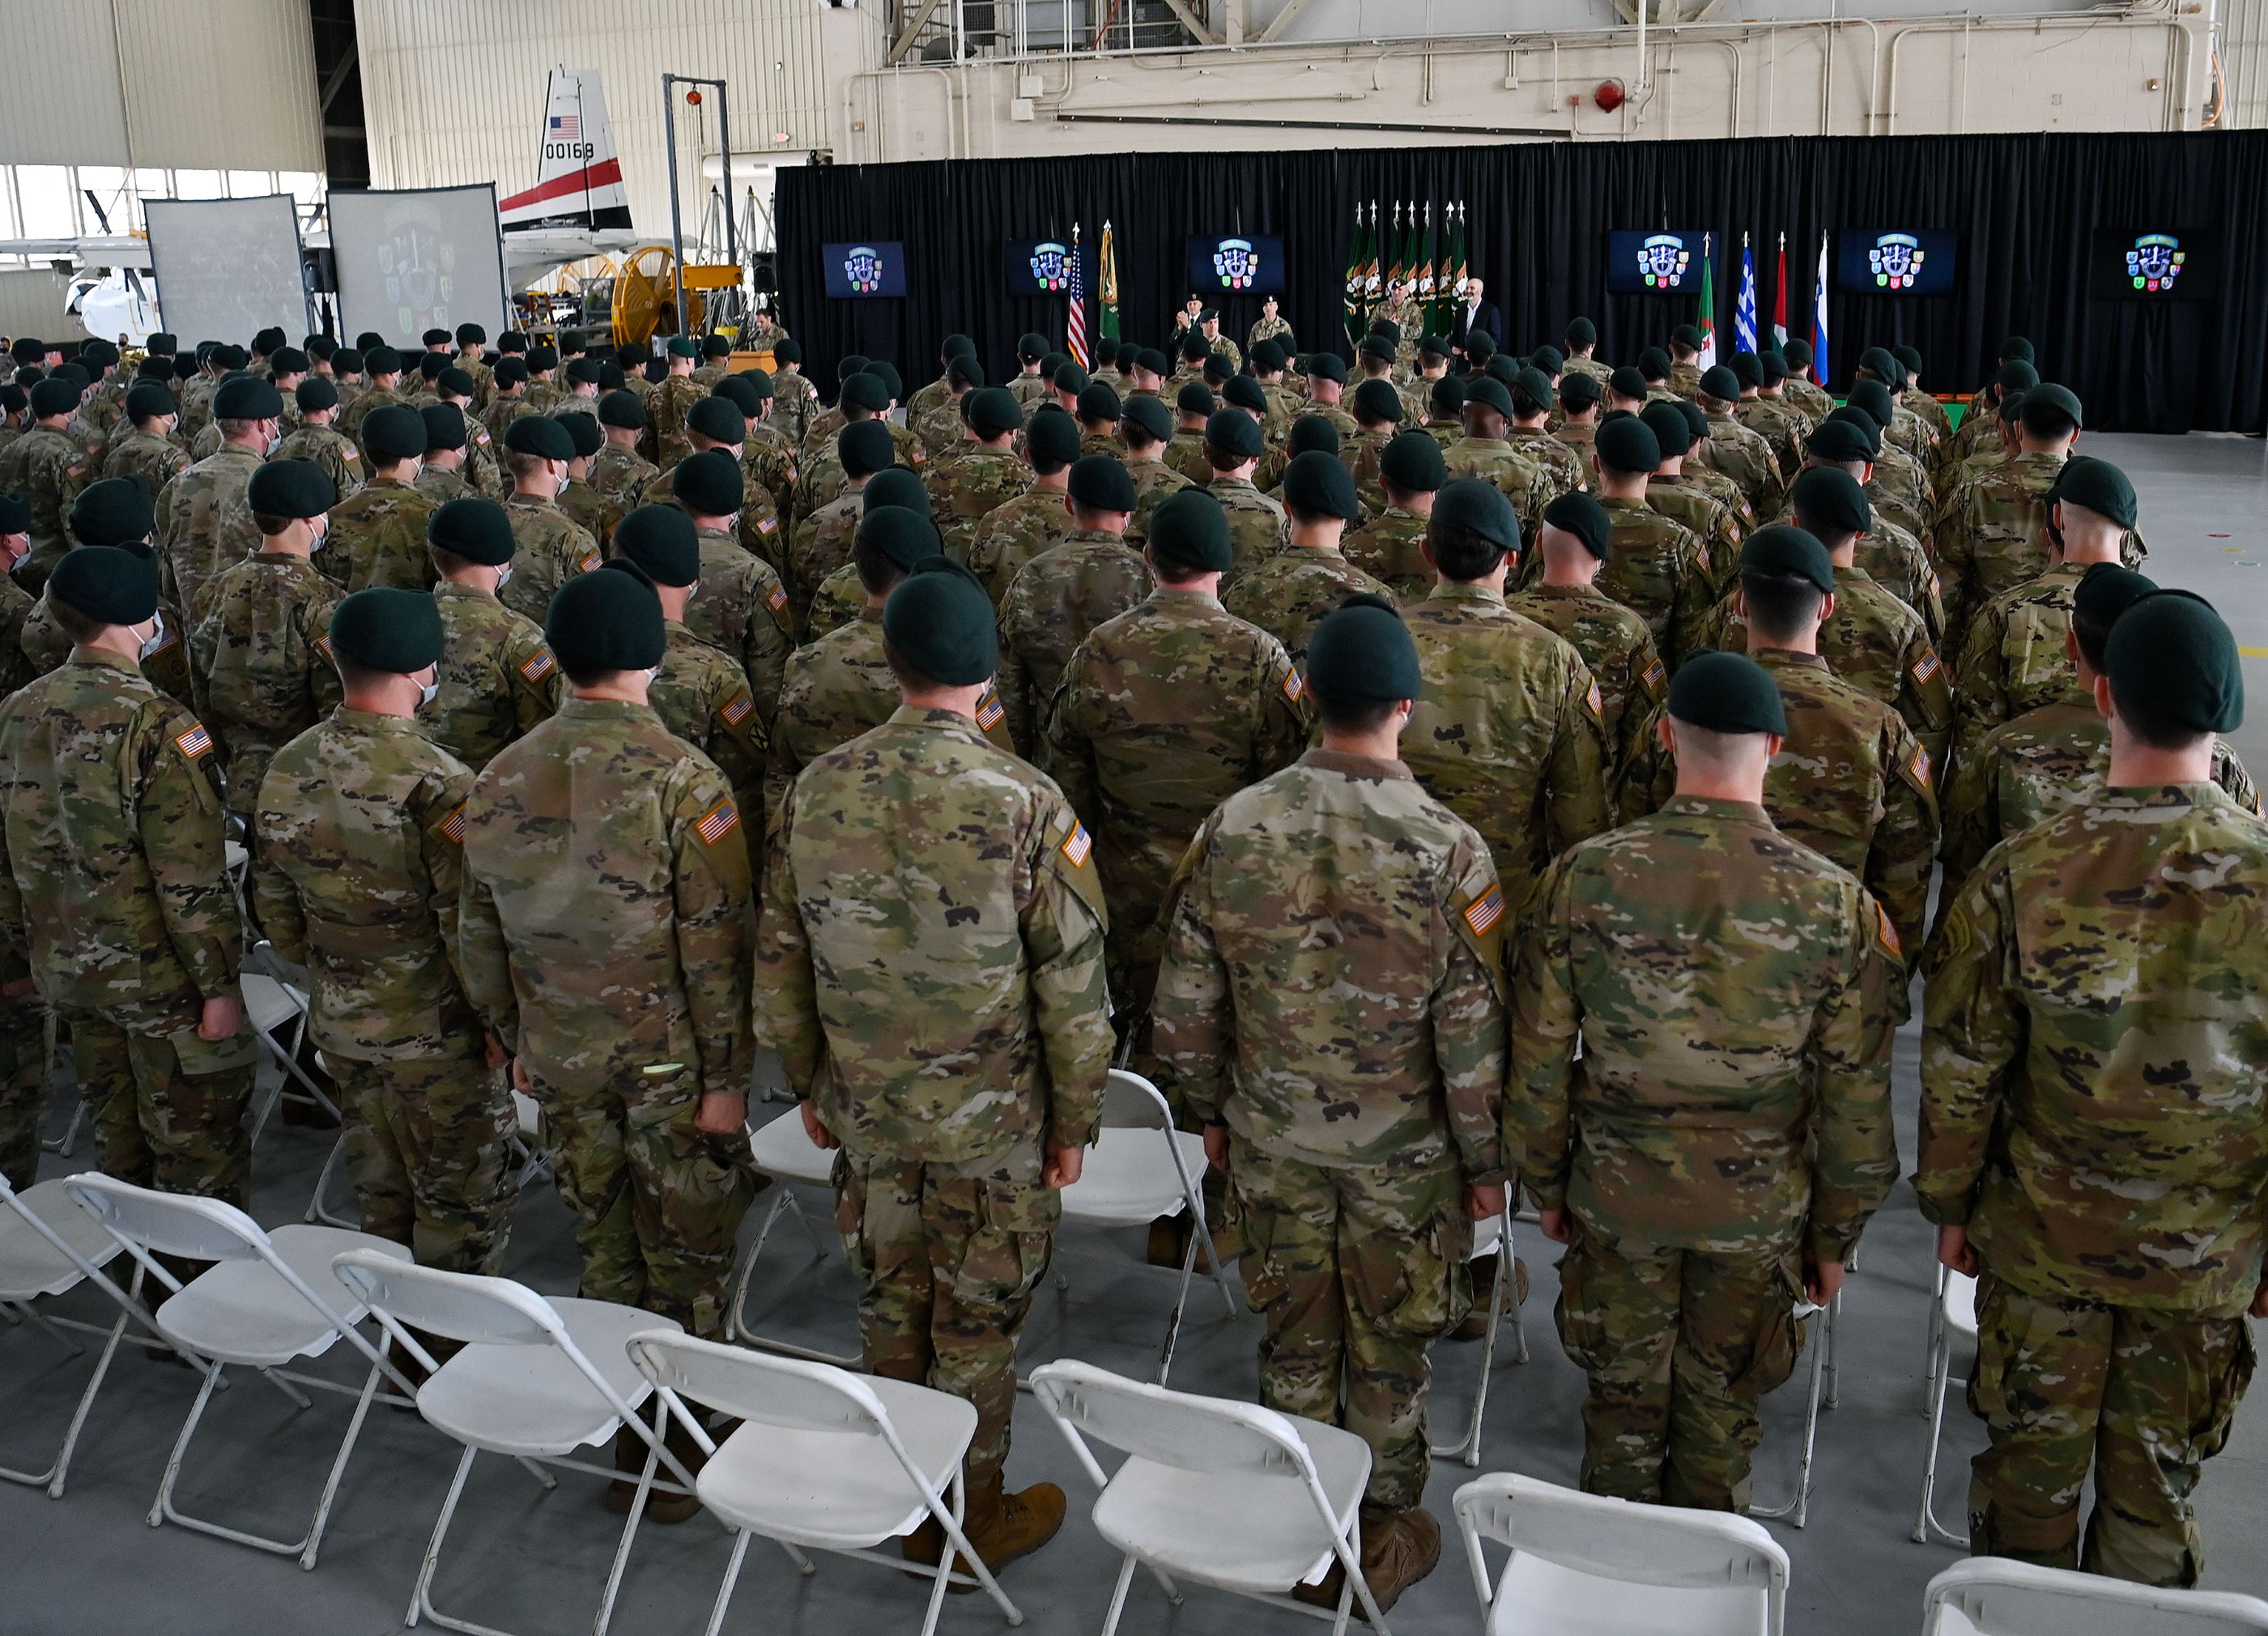 Soldiers assigned to the U.S. Army John F. Kennedy Special Warfare Center and School stand in formation after donning their green berets for the first time during a Regimental First Formation at Fort Bragg, North Carolina February 17, 2022